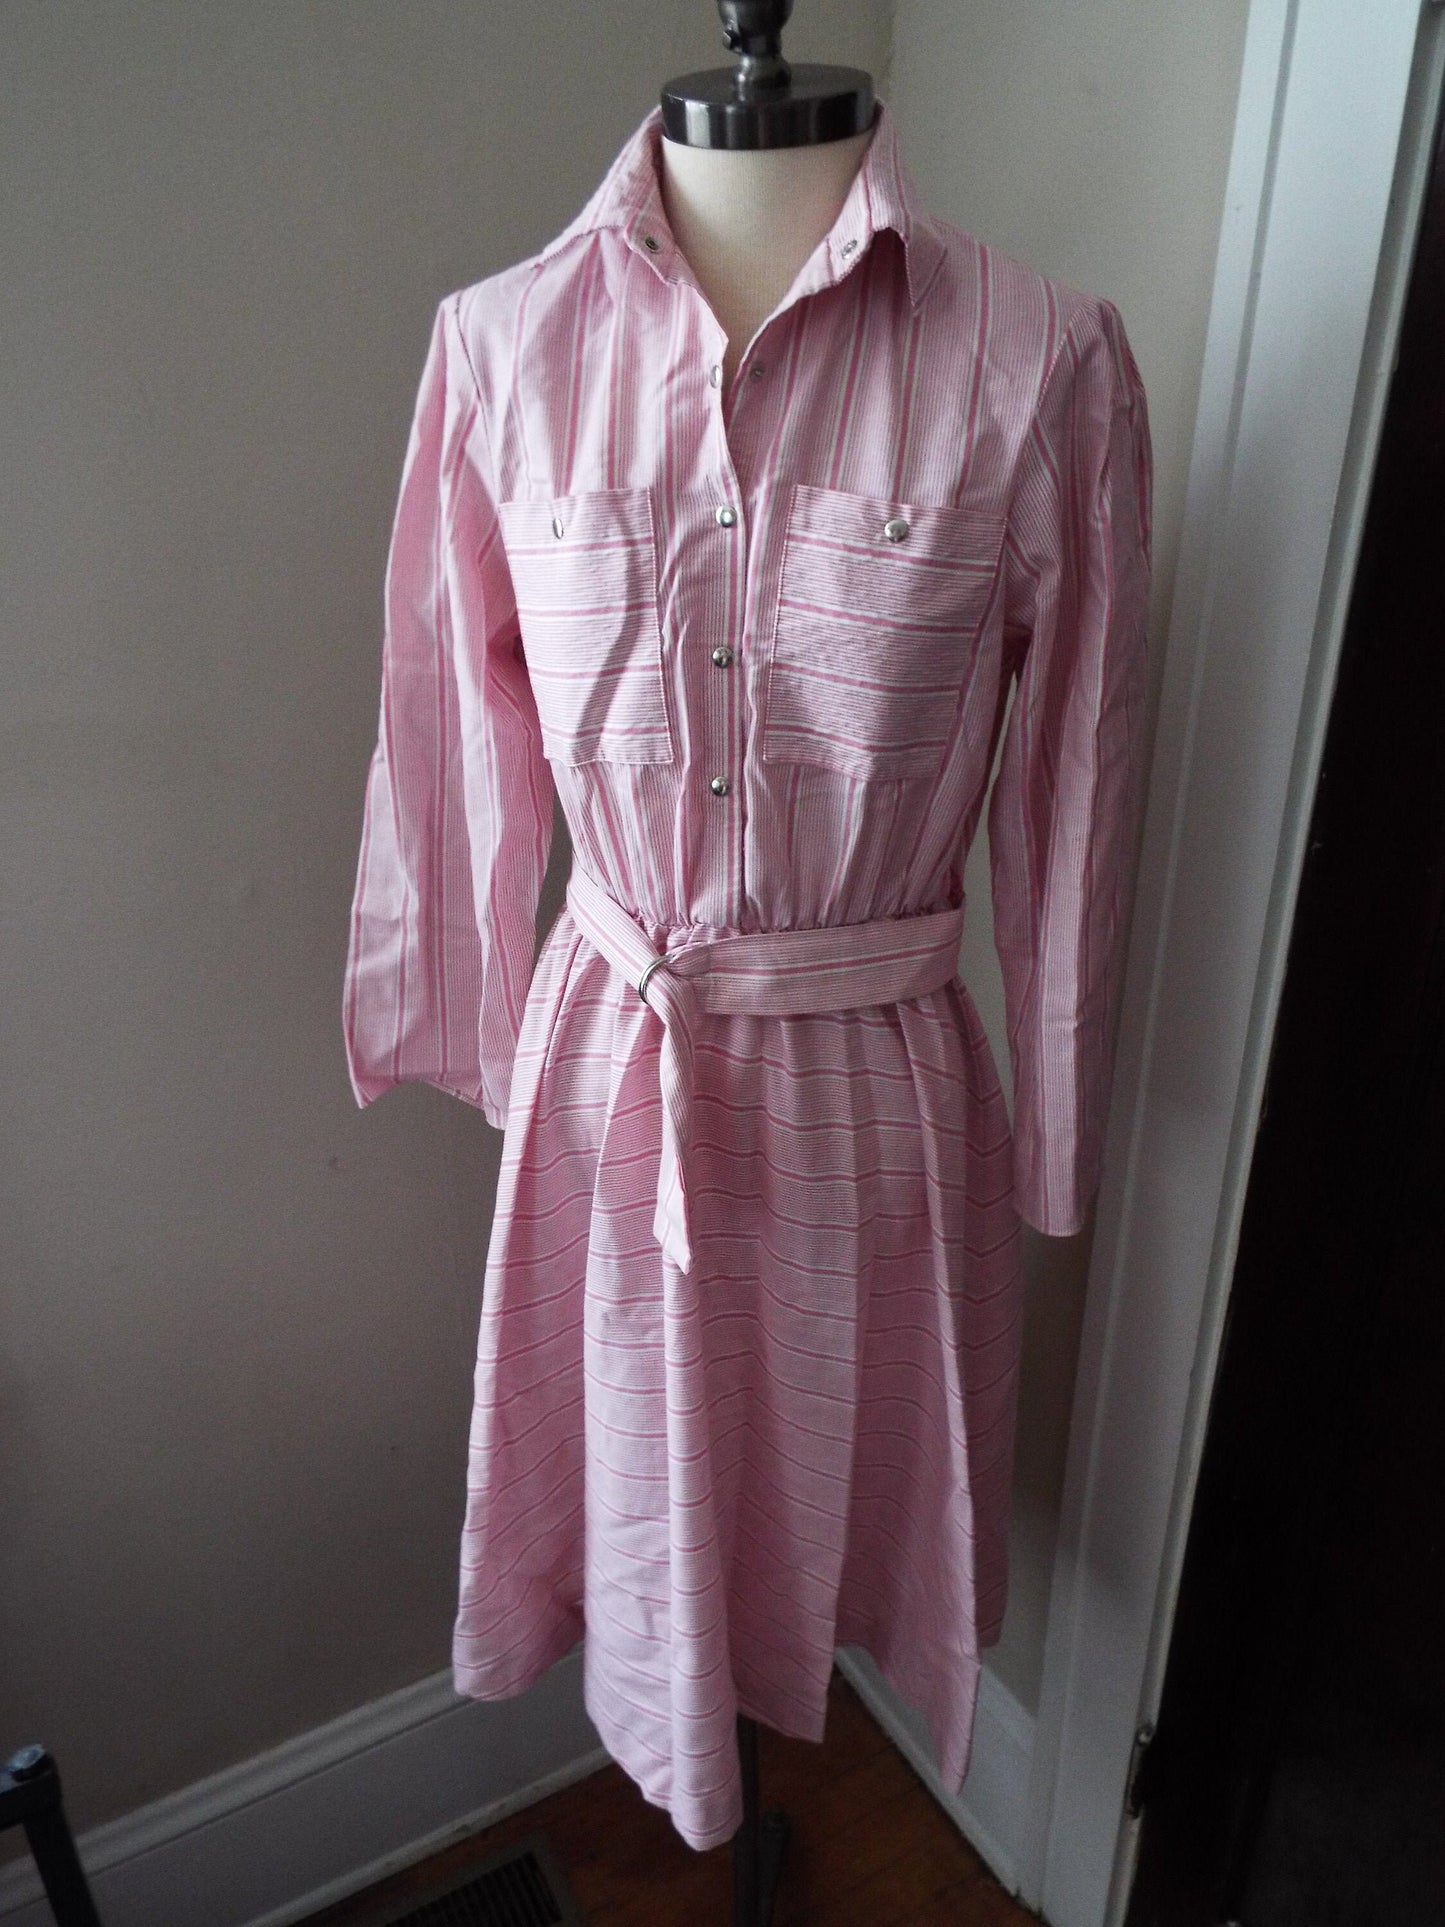 Vintage Long Sleeve Striped Dress by Sunshine Alley